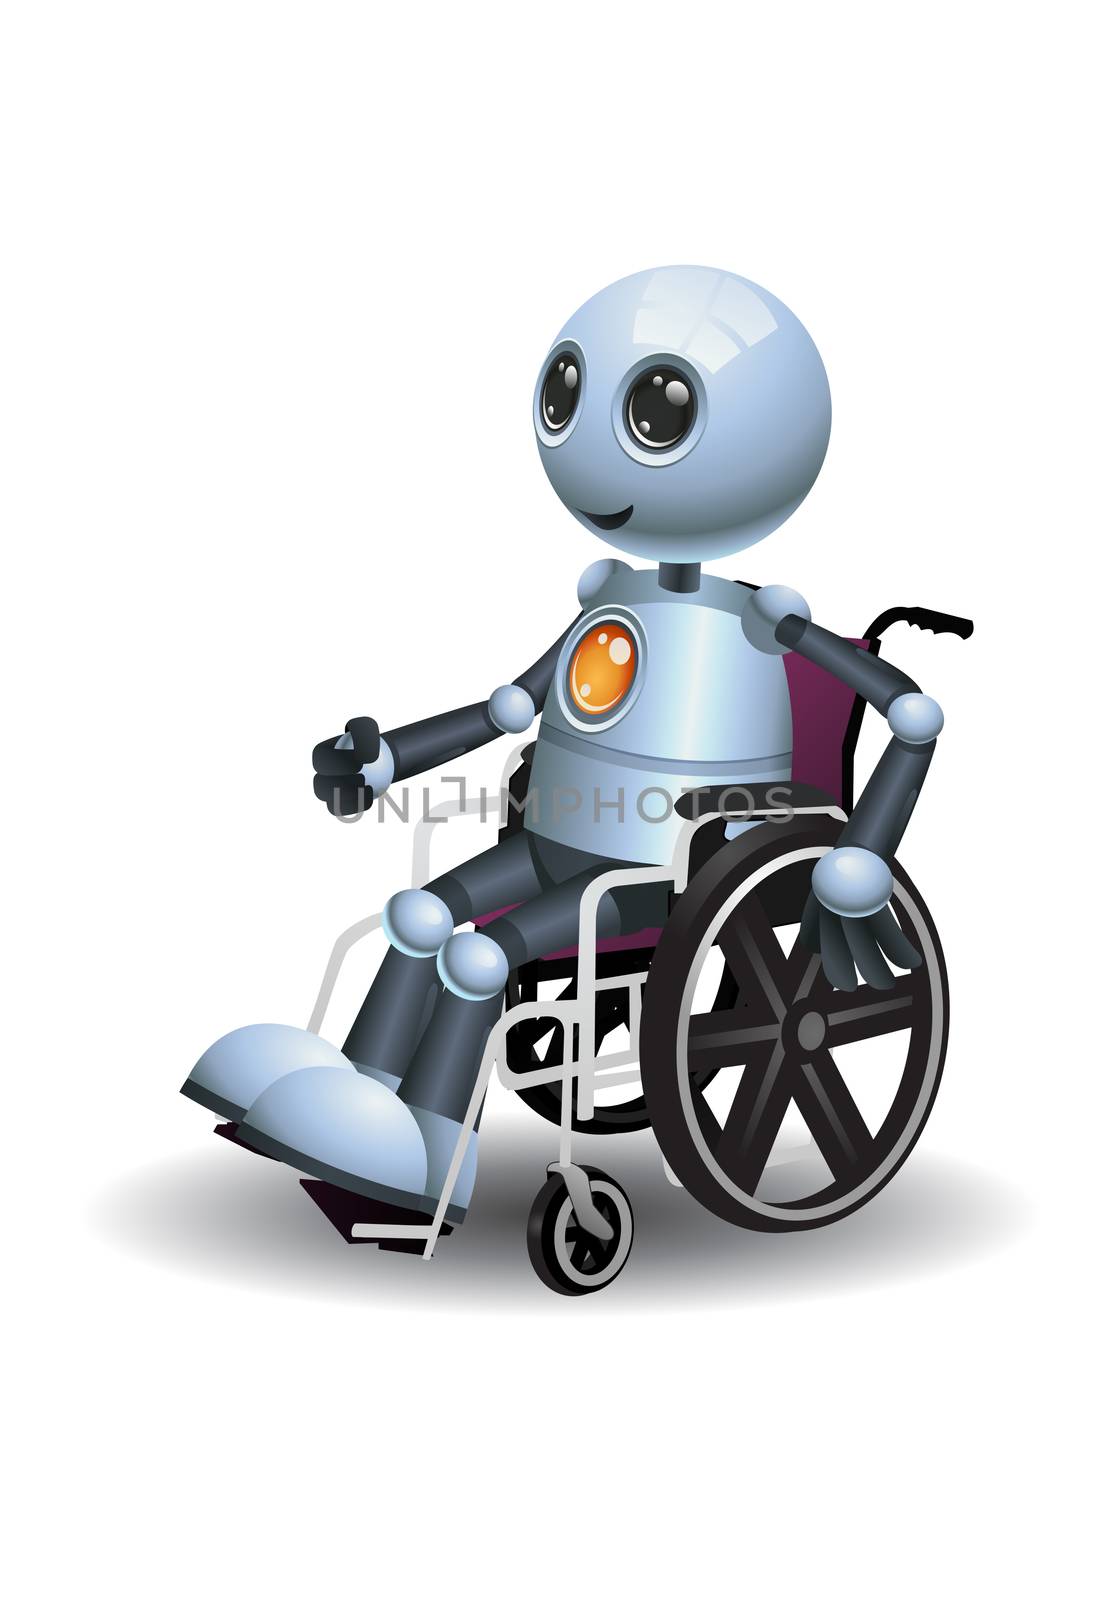 little robot using wheel chair by onime